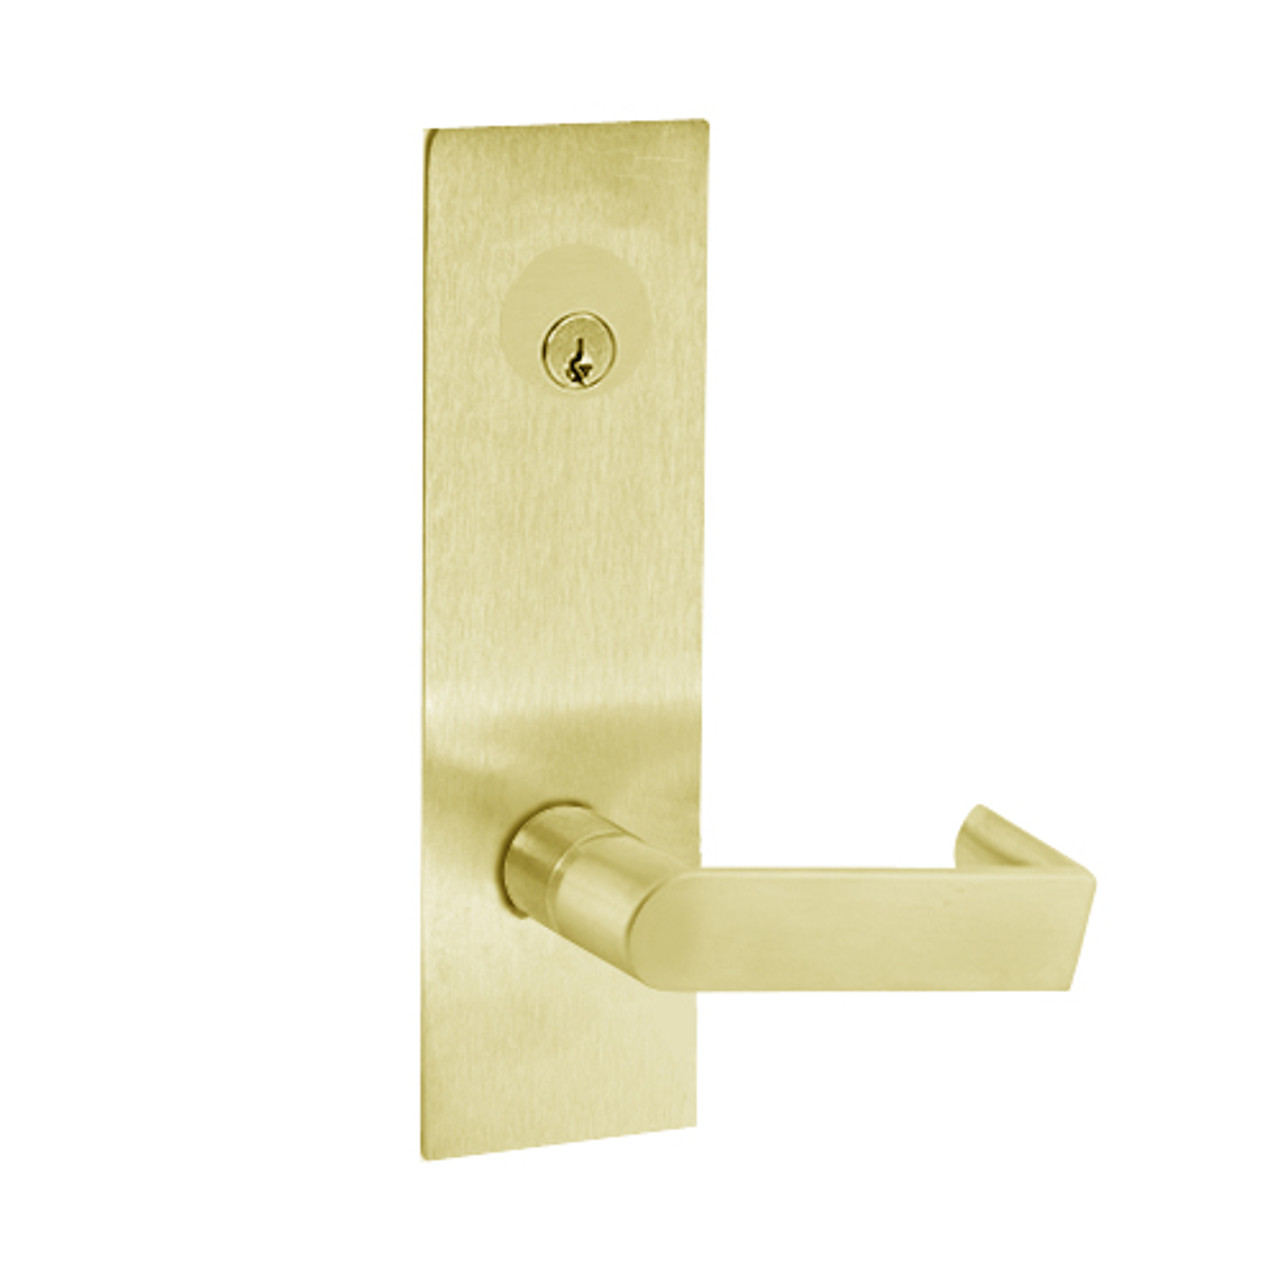 Z7850LRCEE SDC Z7800 Selectric Pro Series Locked Outside Sides Failsafe Electric Mortise Lock with Eclipse Lever in Bright Brass